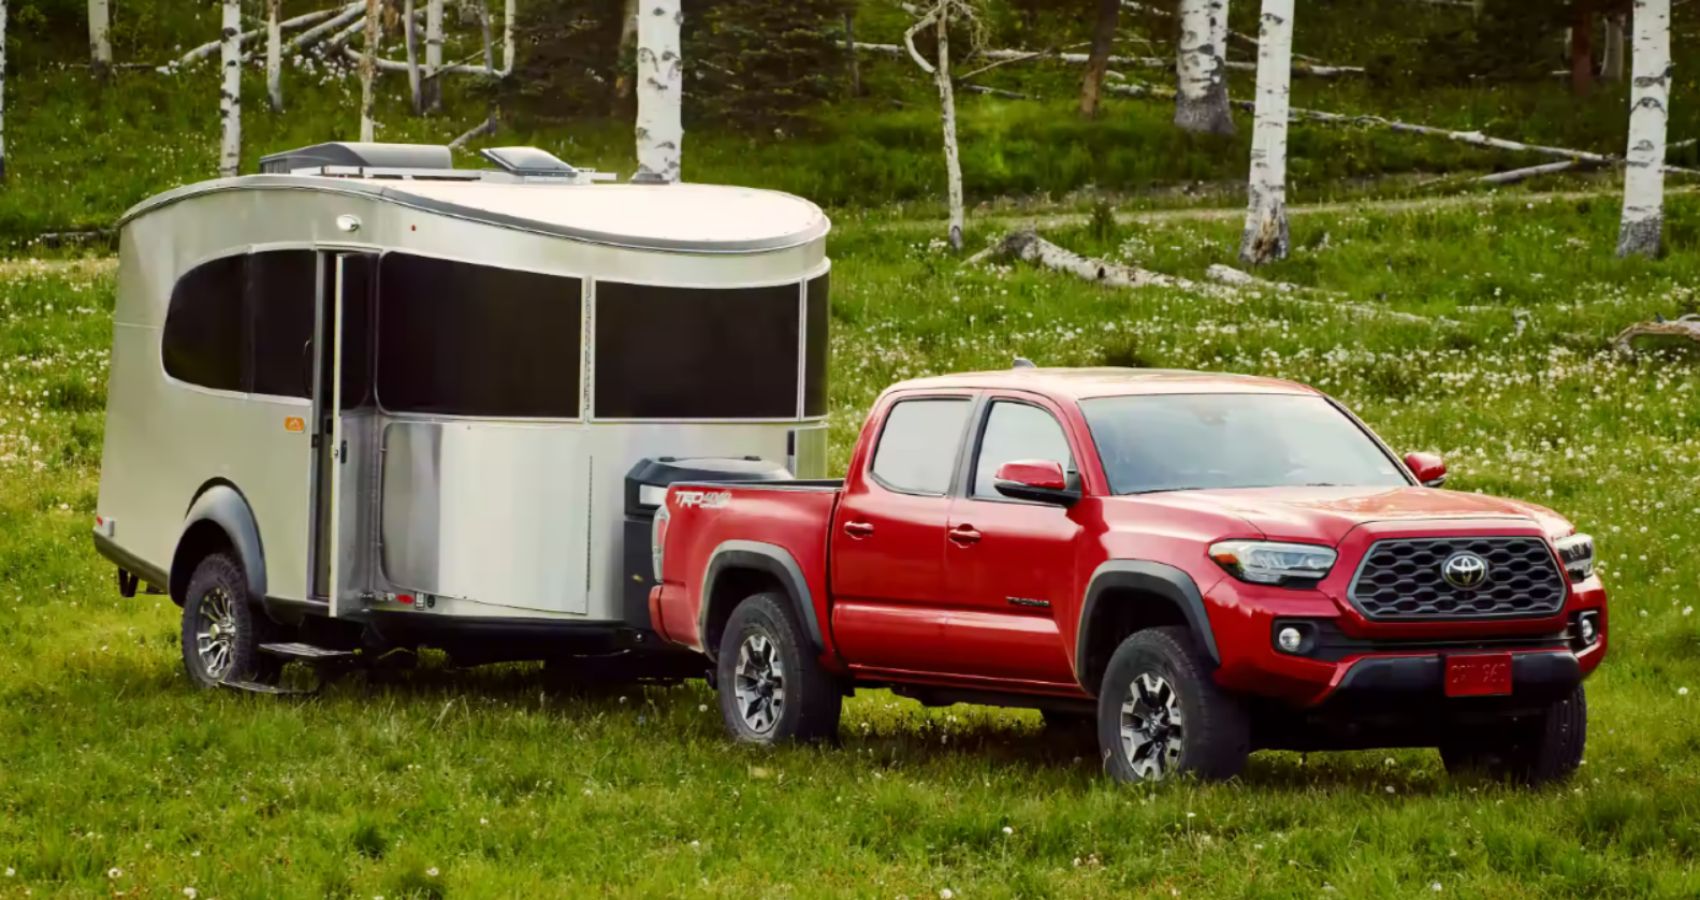 Toyota Tacoma Has Decent Towing Abilities